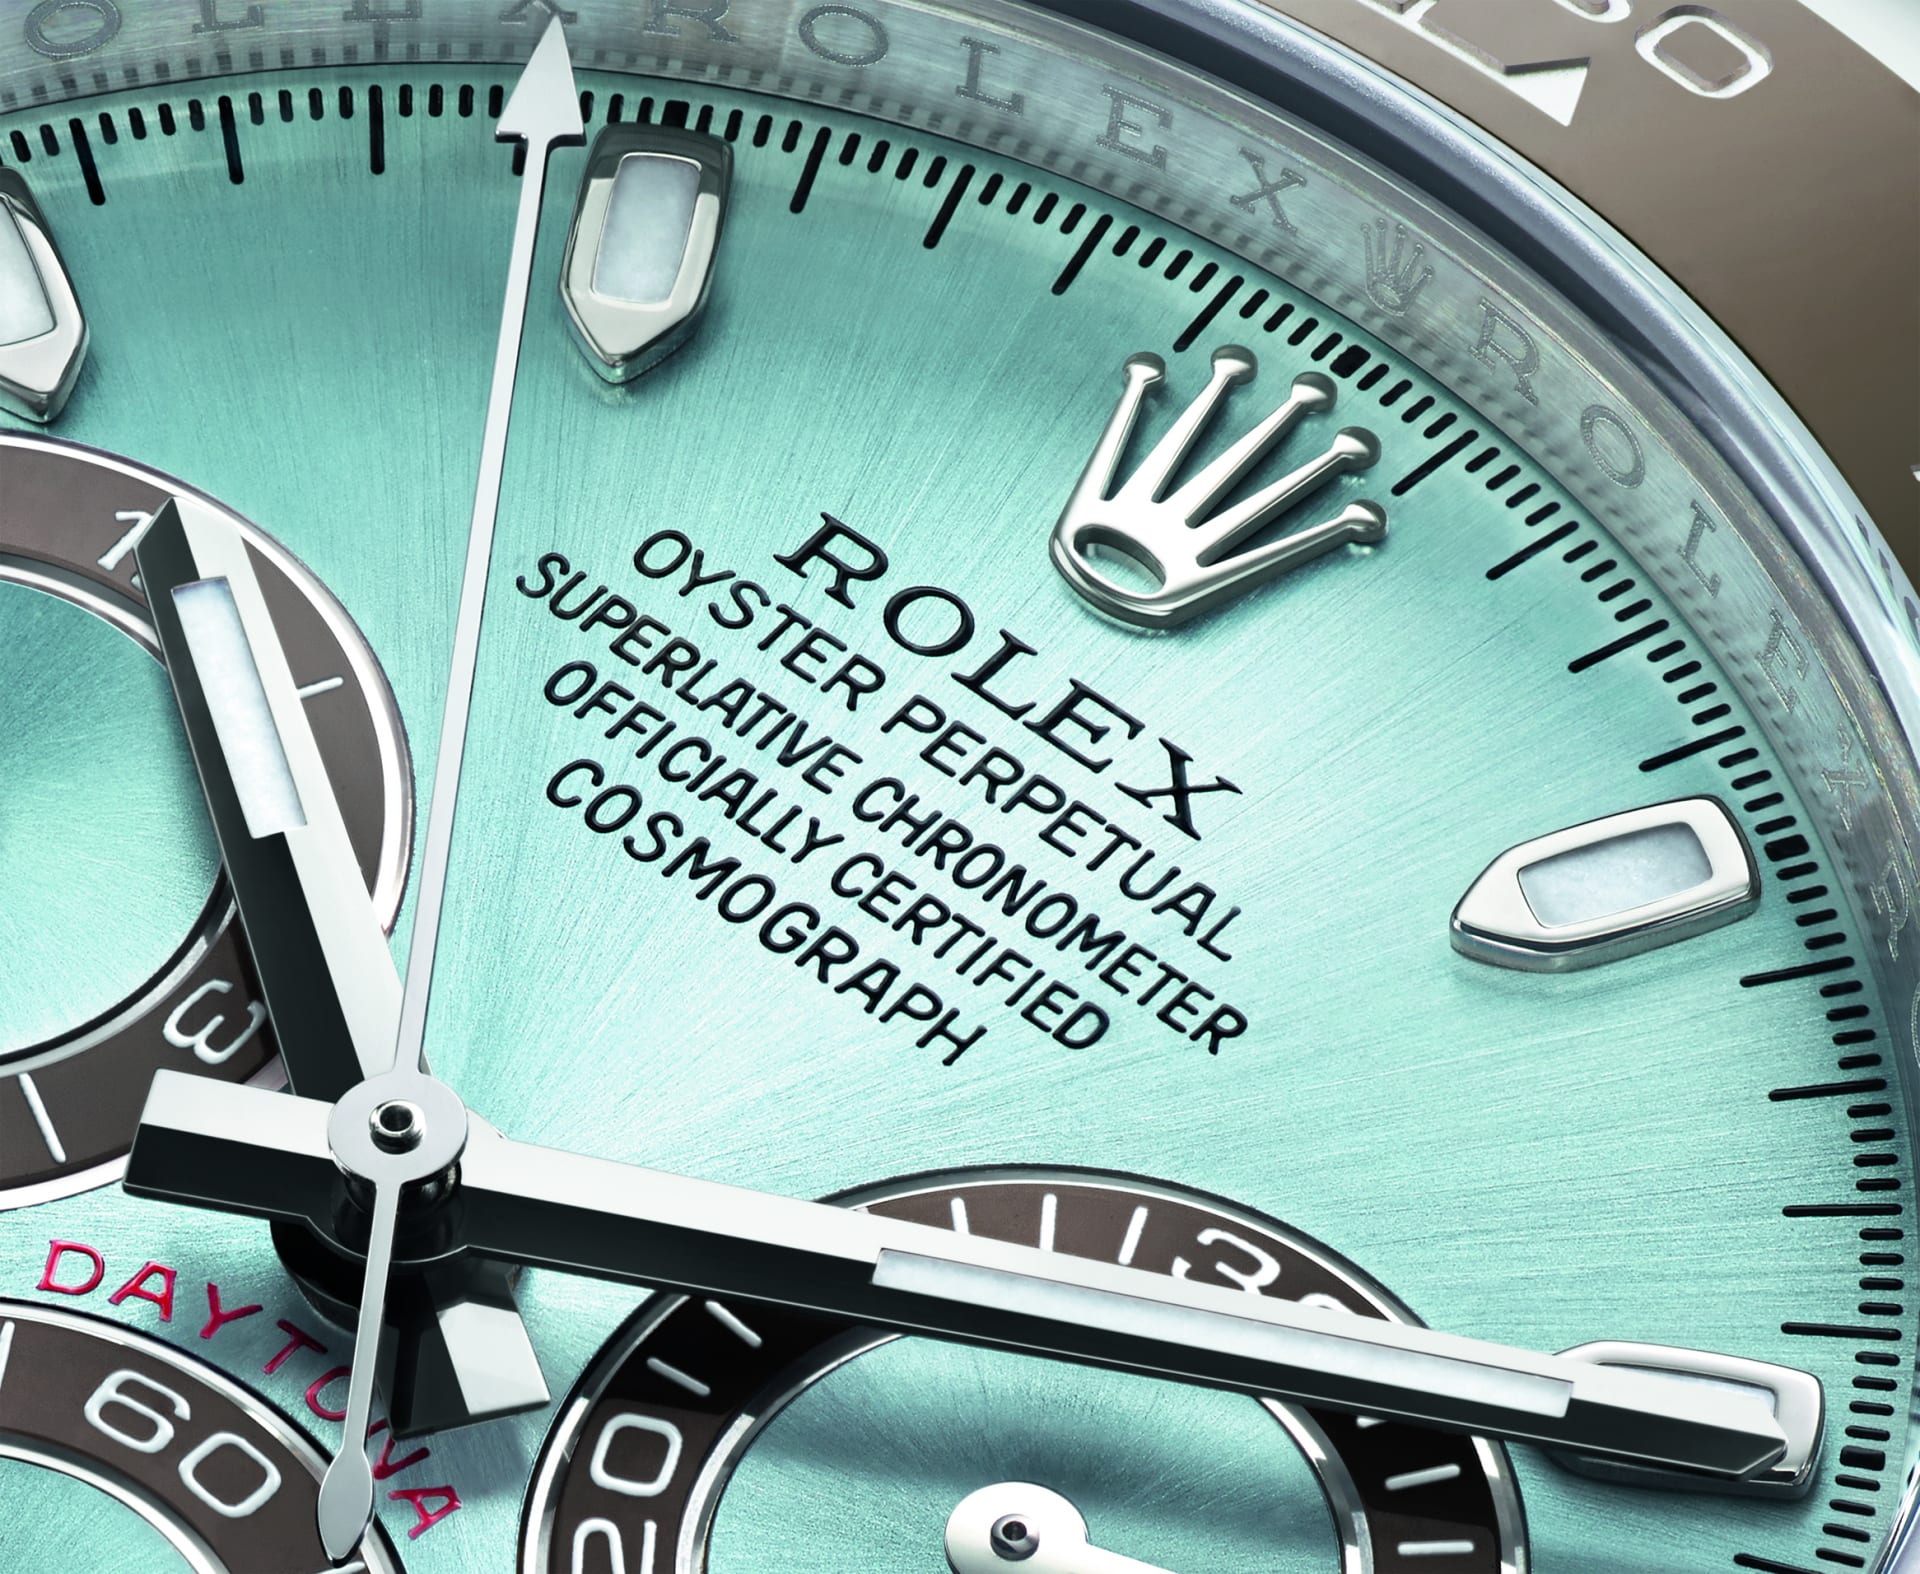 Why Rolexes Are so Expensive: Discover the Luxury Brand